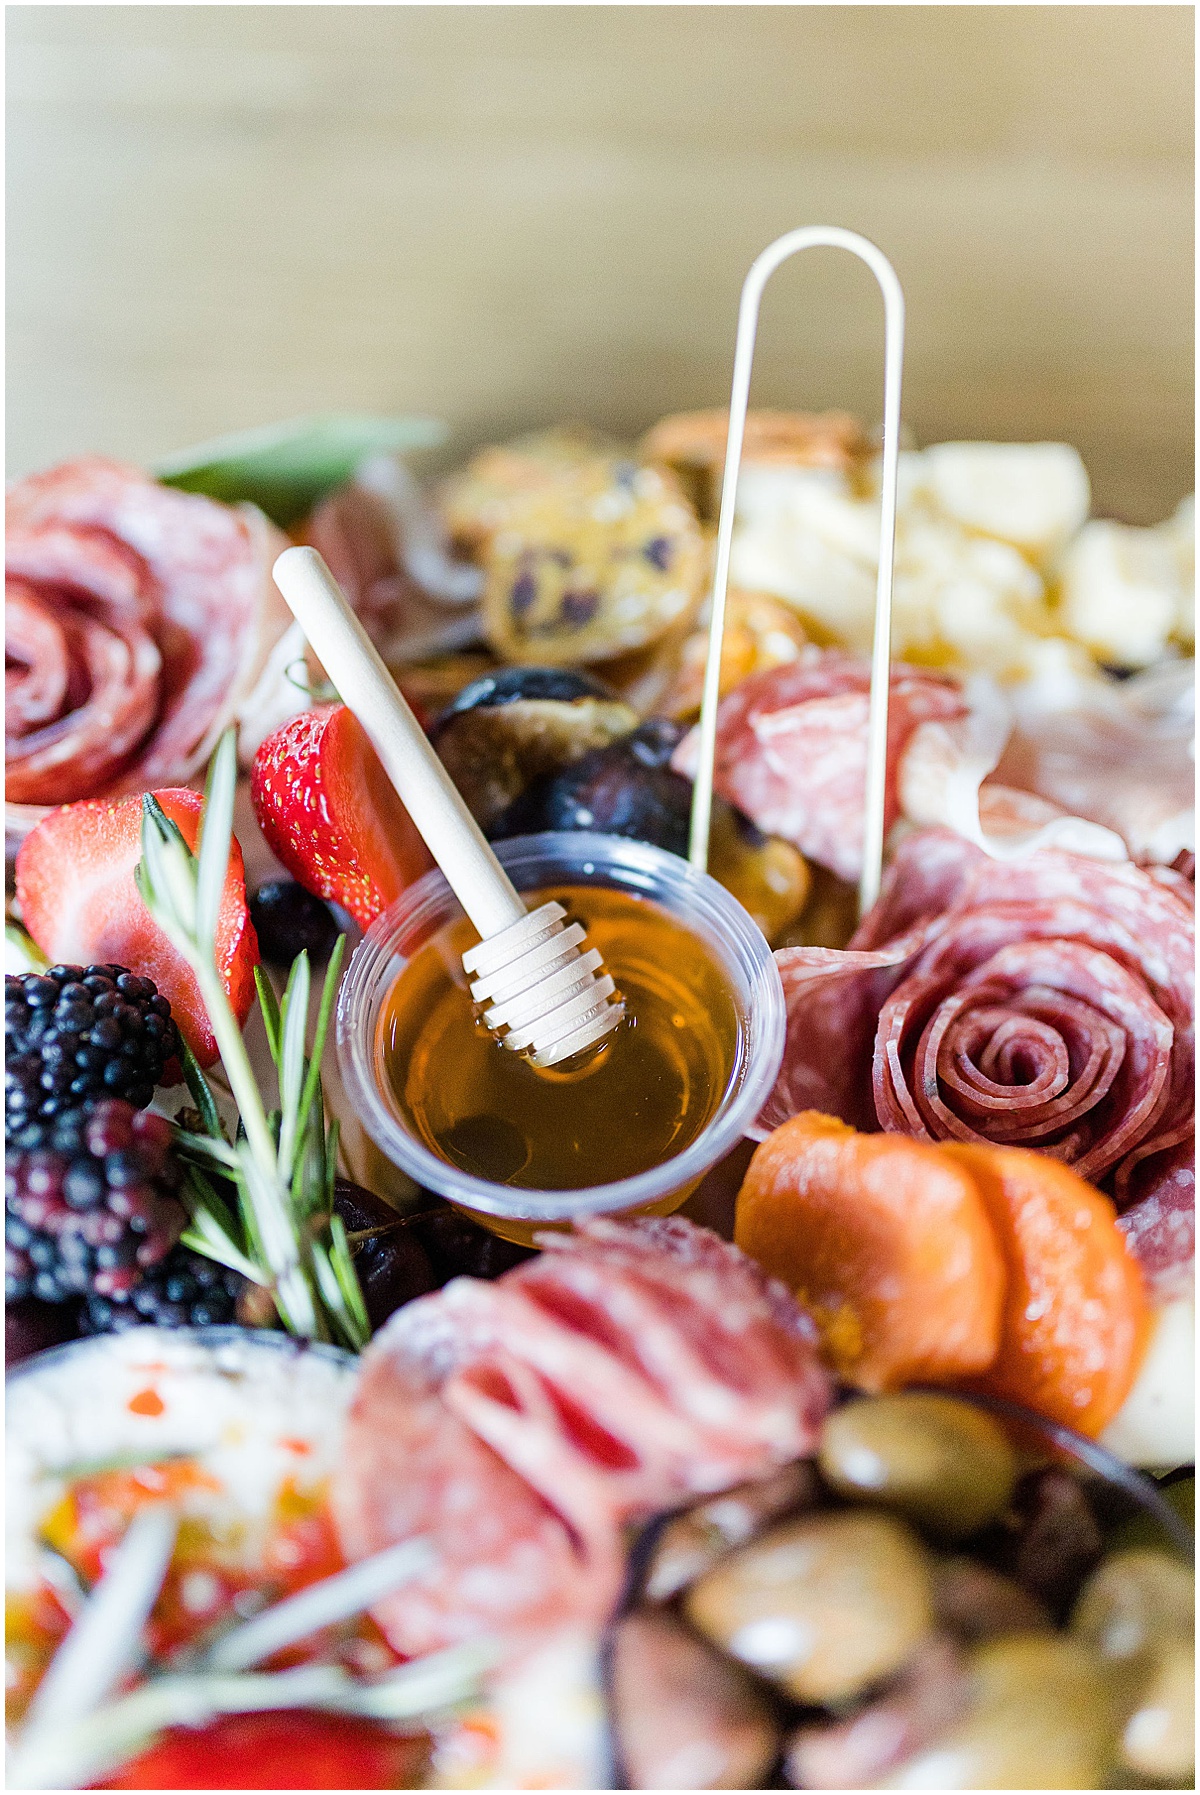 Charcuterie table with cheeses, meats, fruits and honey